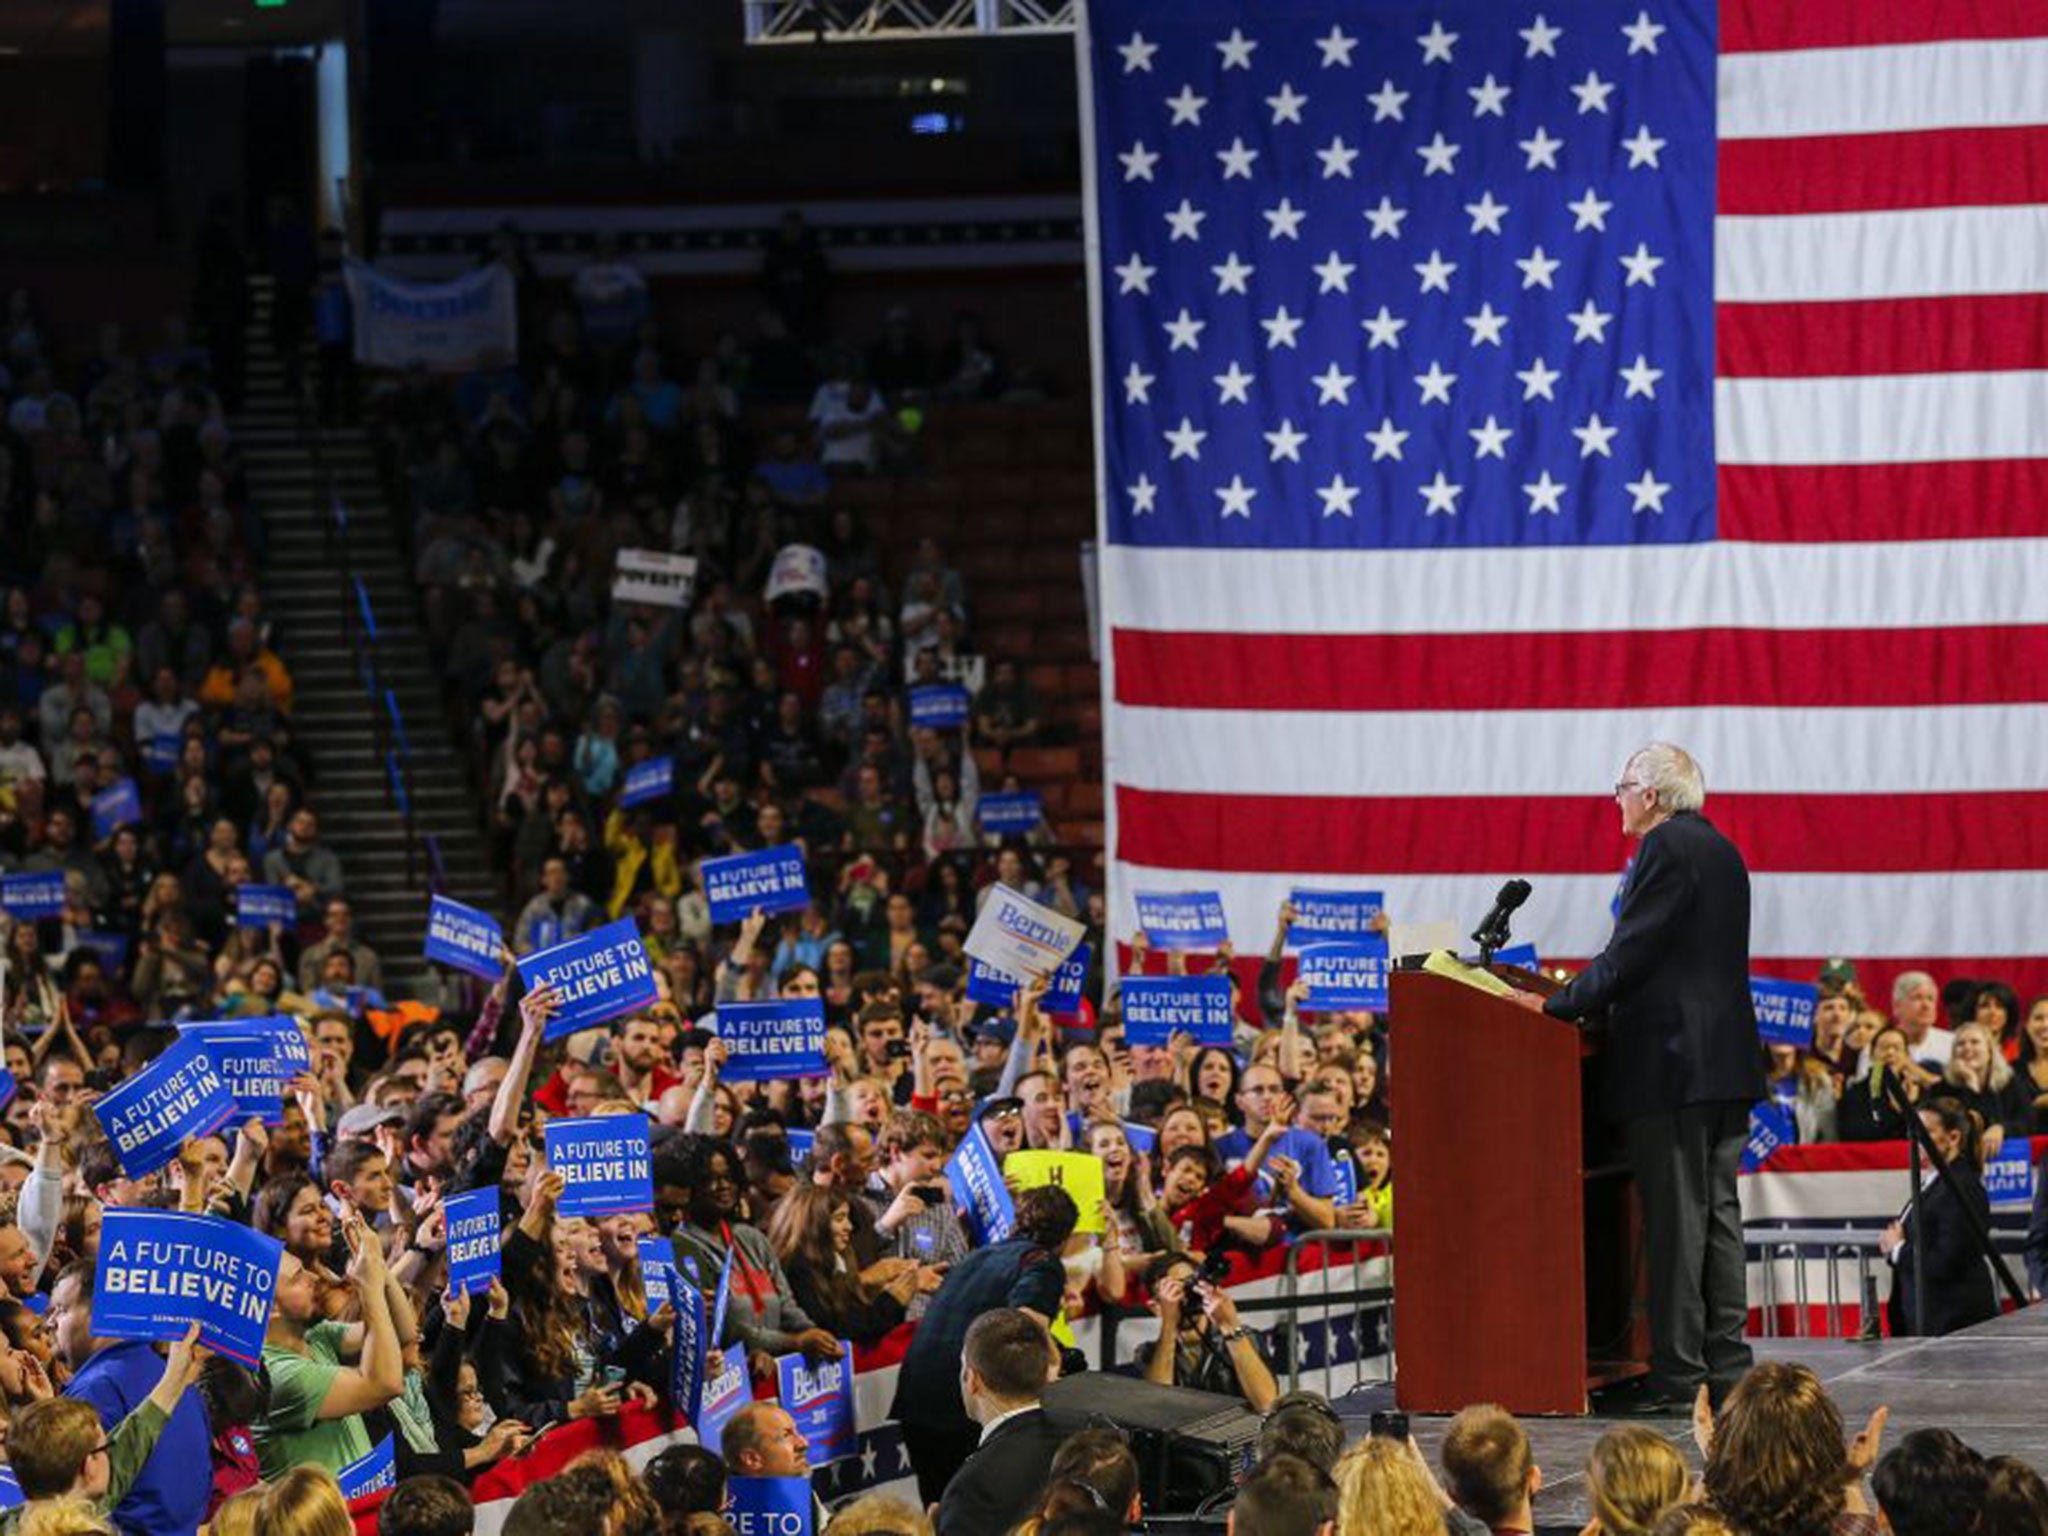 Bernie Sanders contests the Democratic nomination in the 2016 race for the White House.